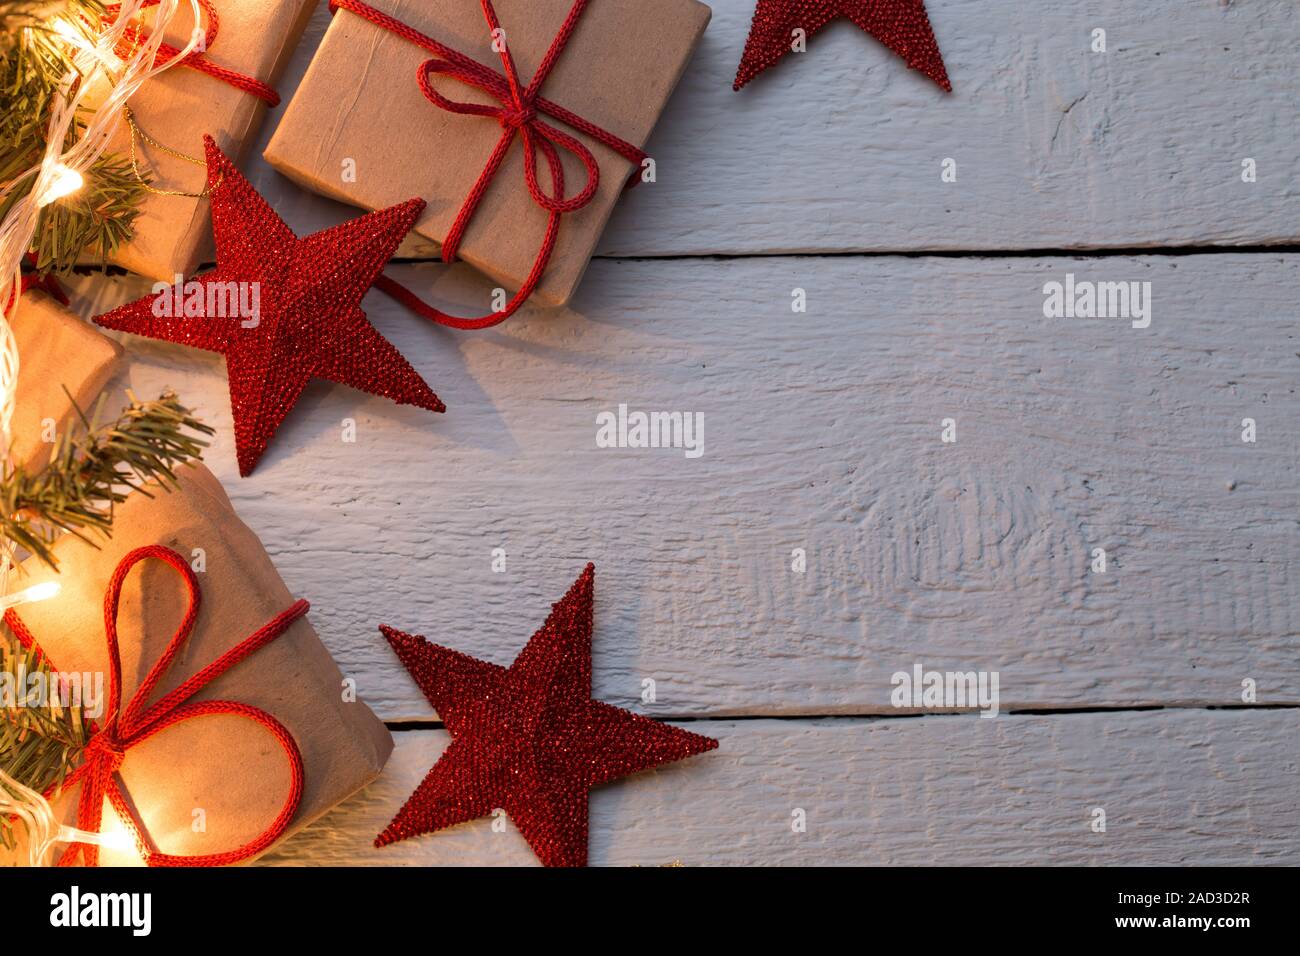 Presents in cartons, red stars Stock Photo